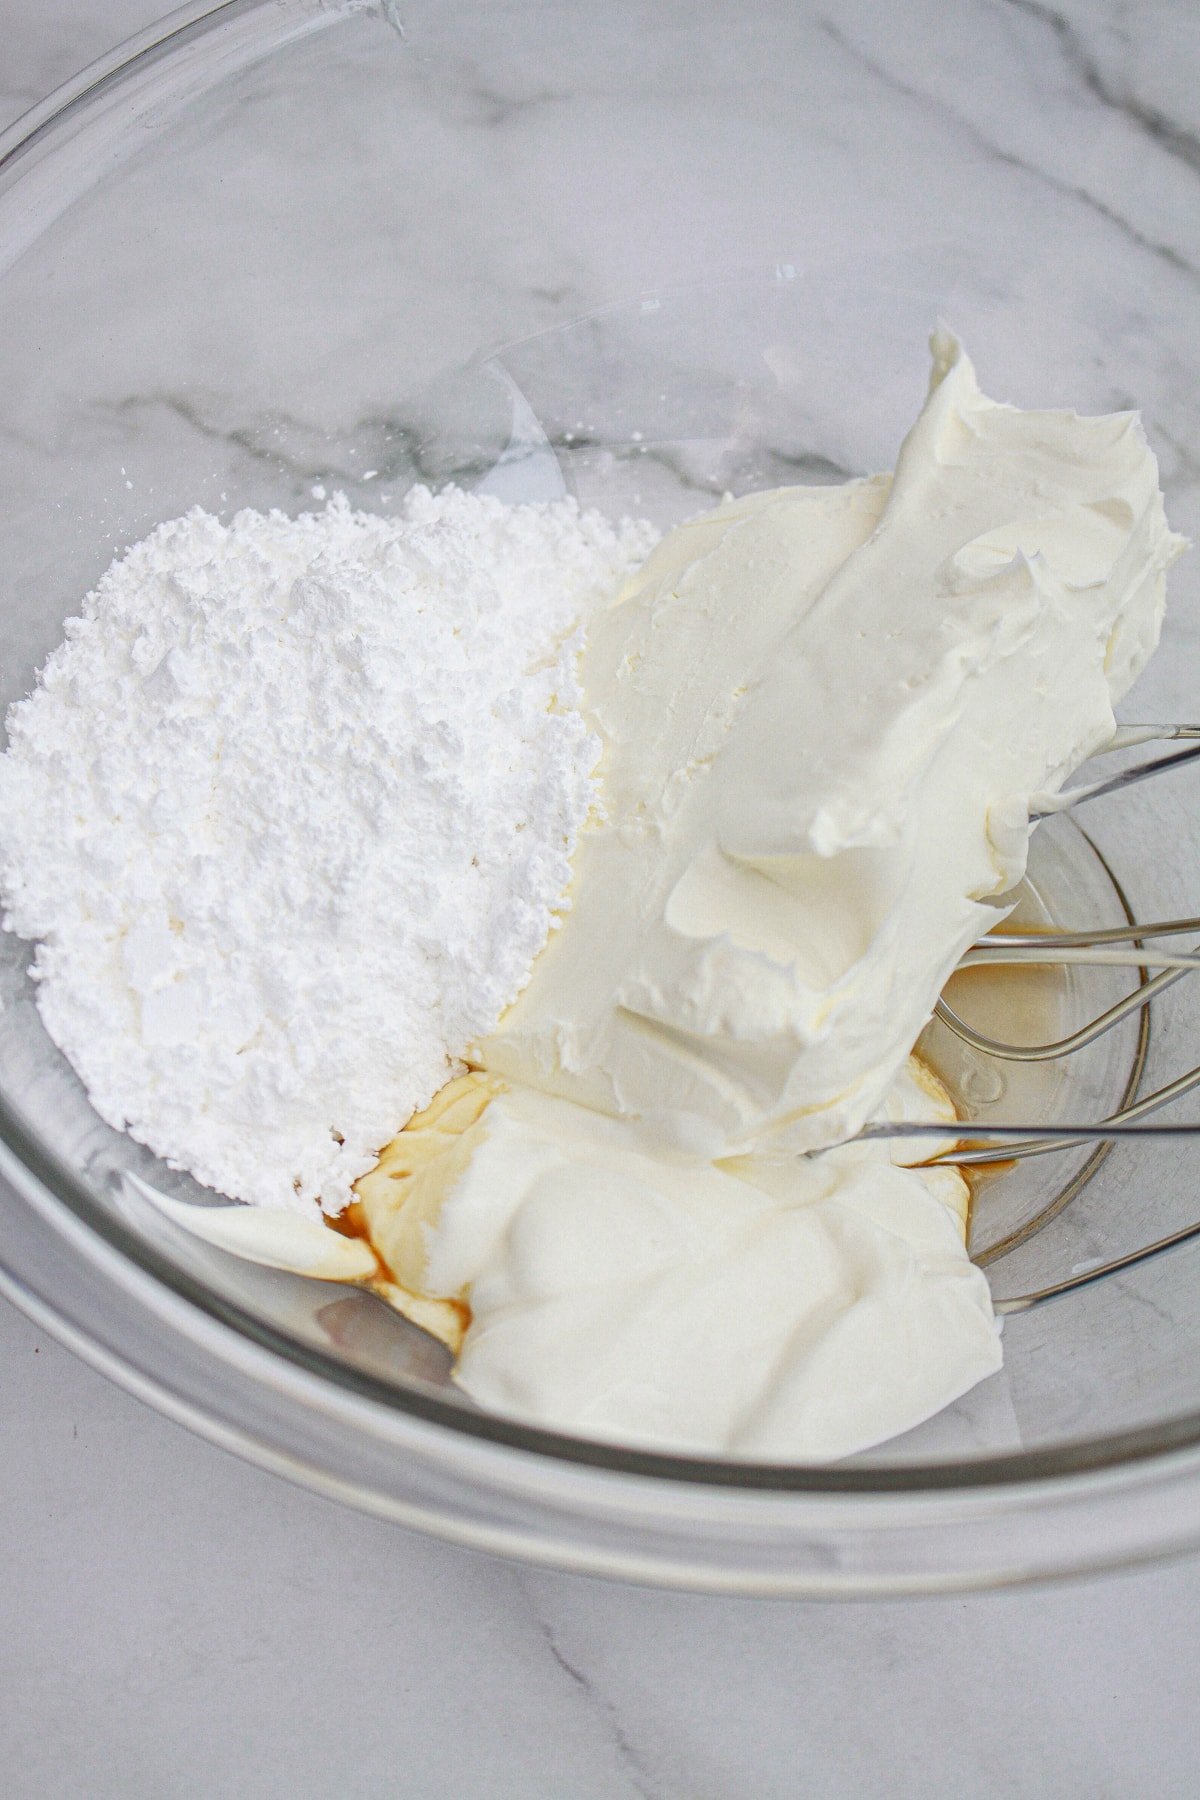 Cream cheese, powdered sugar, vanilla, and sour cream in a glass mixing bowl